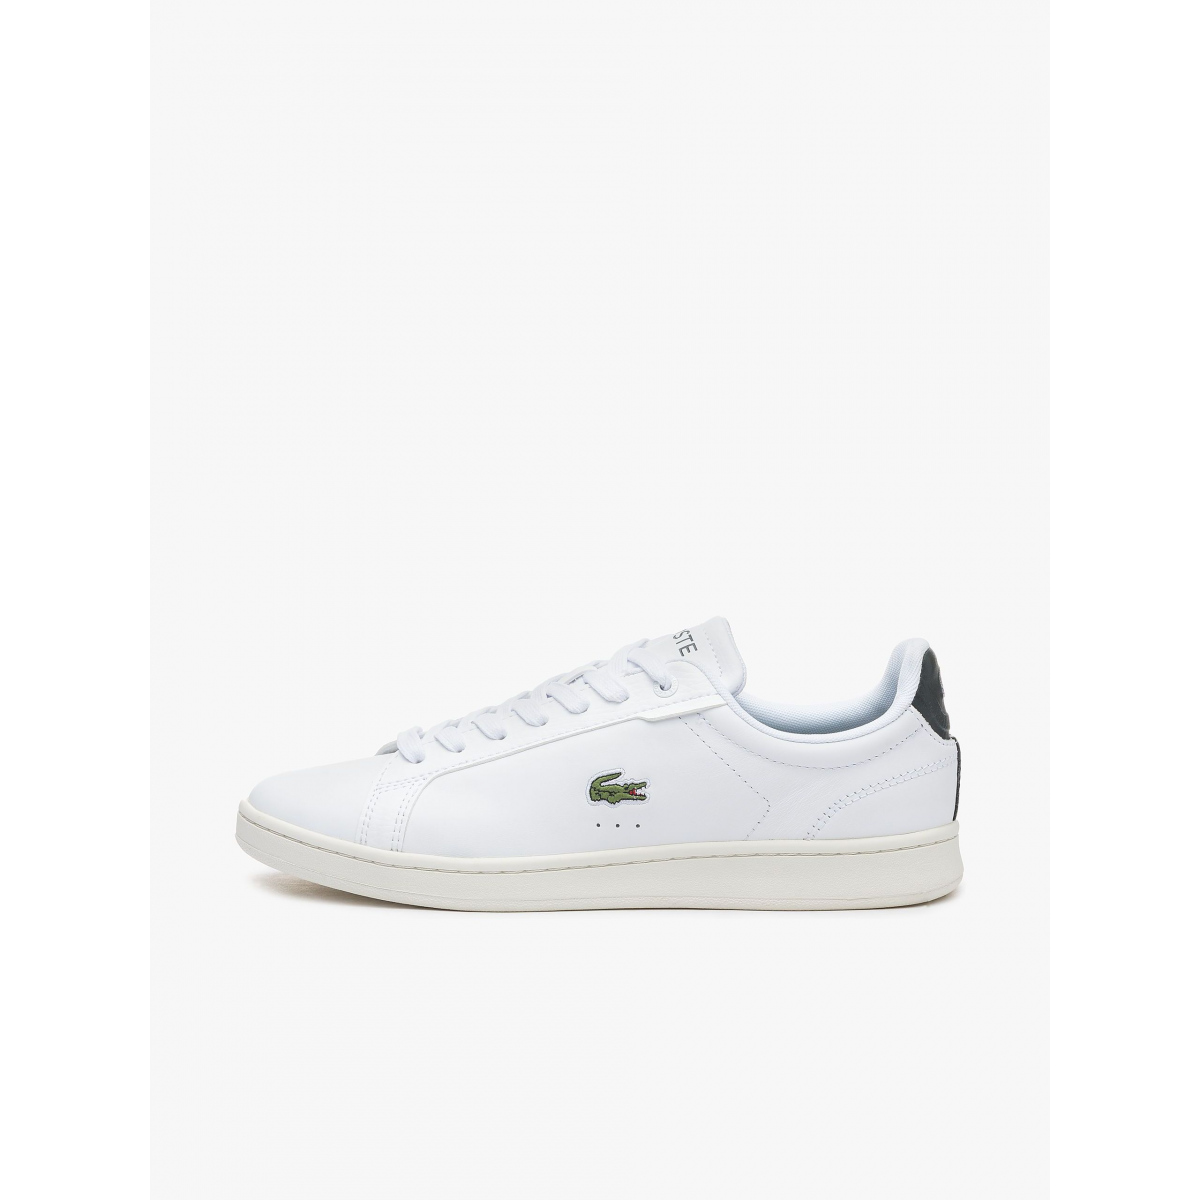 Lacoste Carnaby Pro Leather Premium - 45SMA0112 1R5 | Fuxia